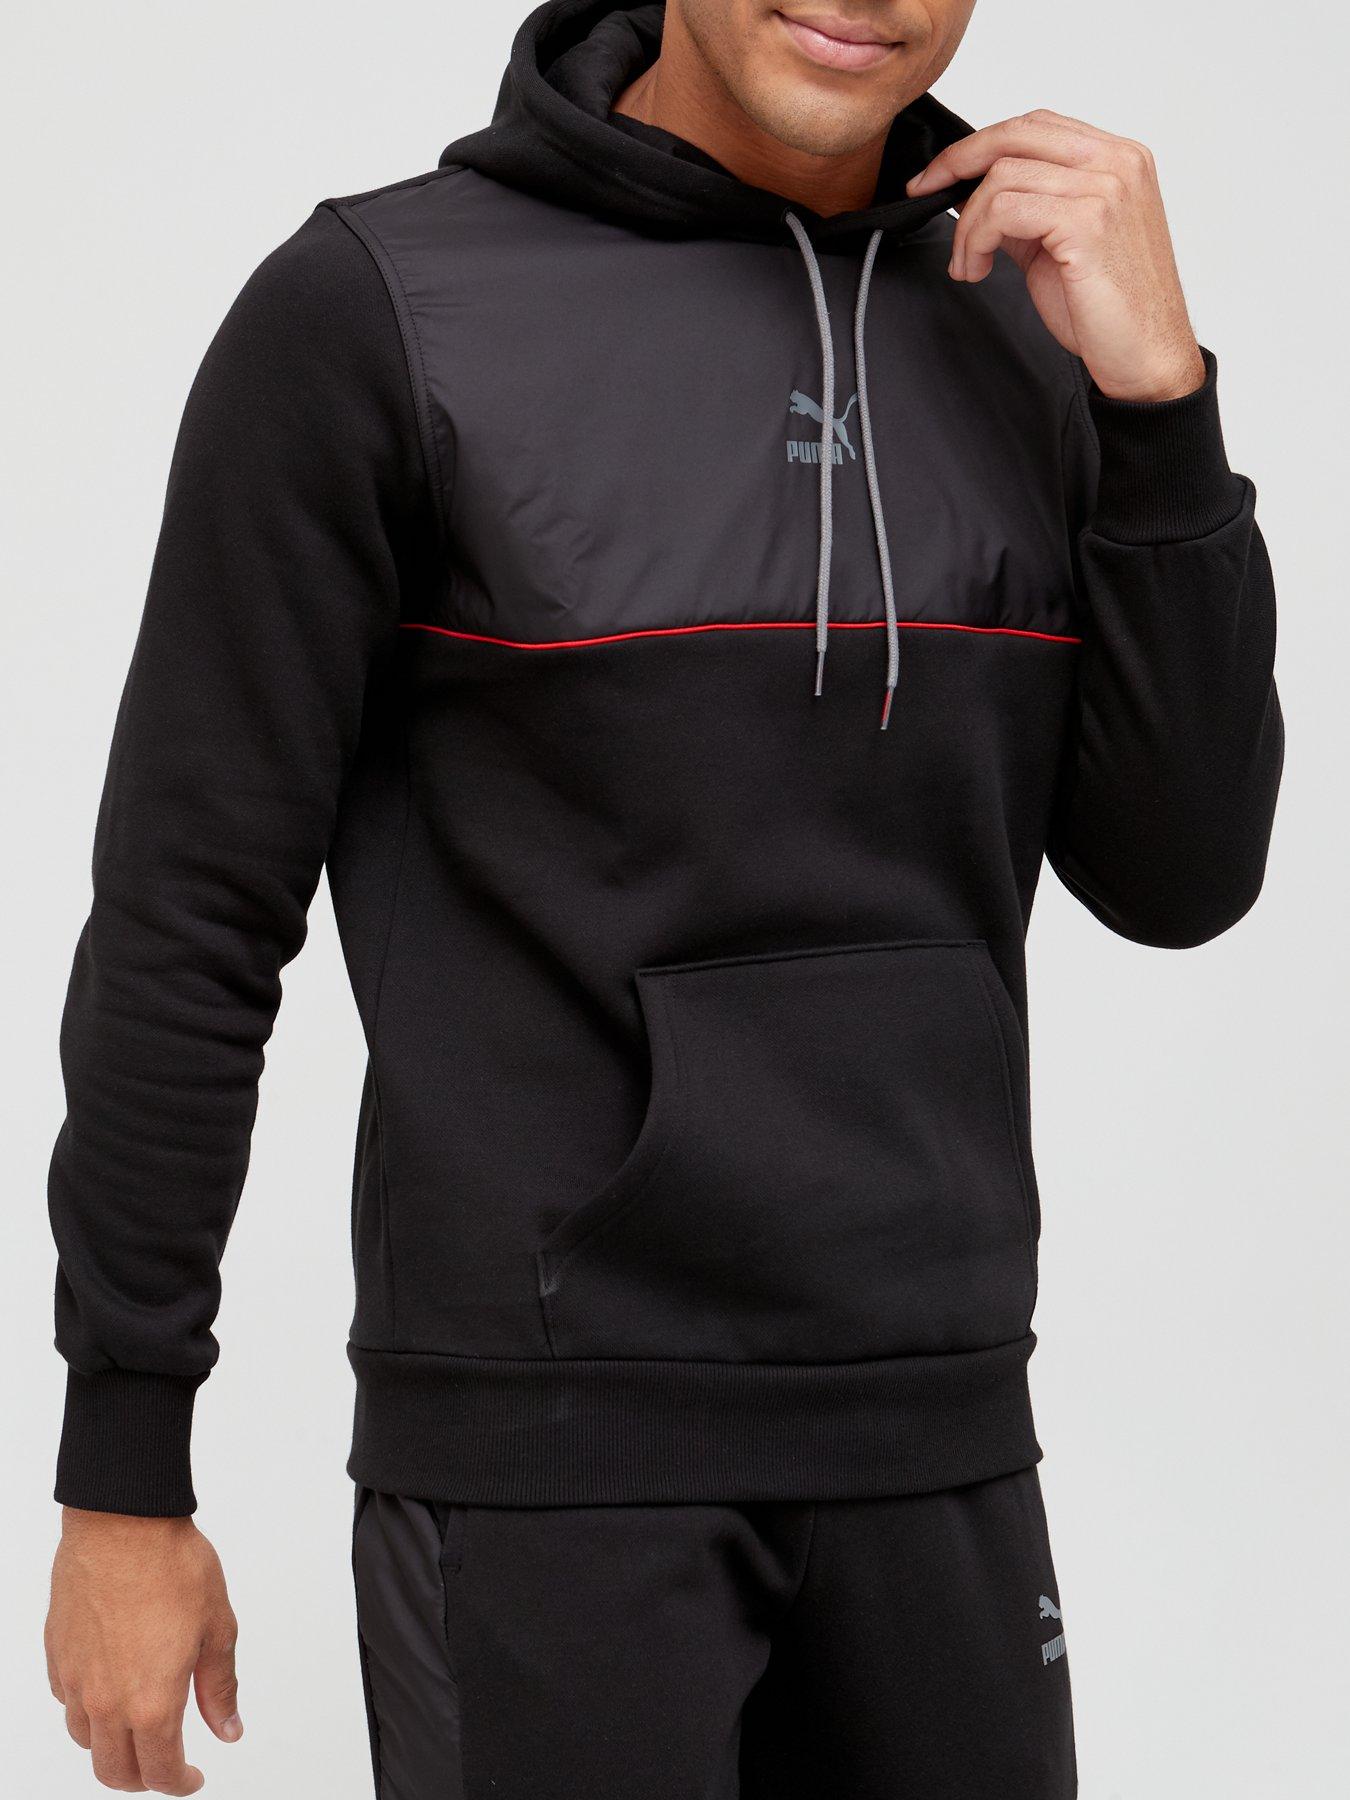 Tommy Hilfiger Men's Modern Essentials French Terry Pullover Hoodie Details about   SALE